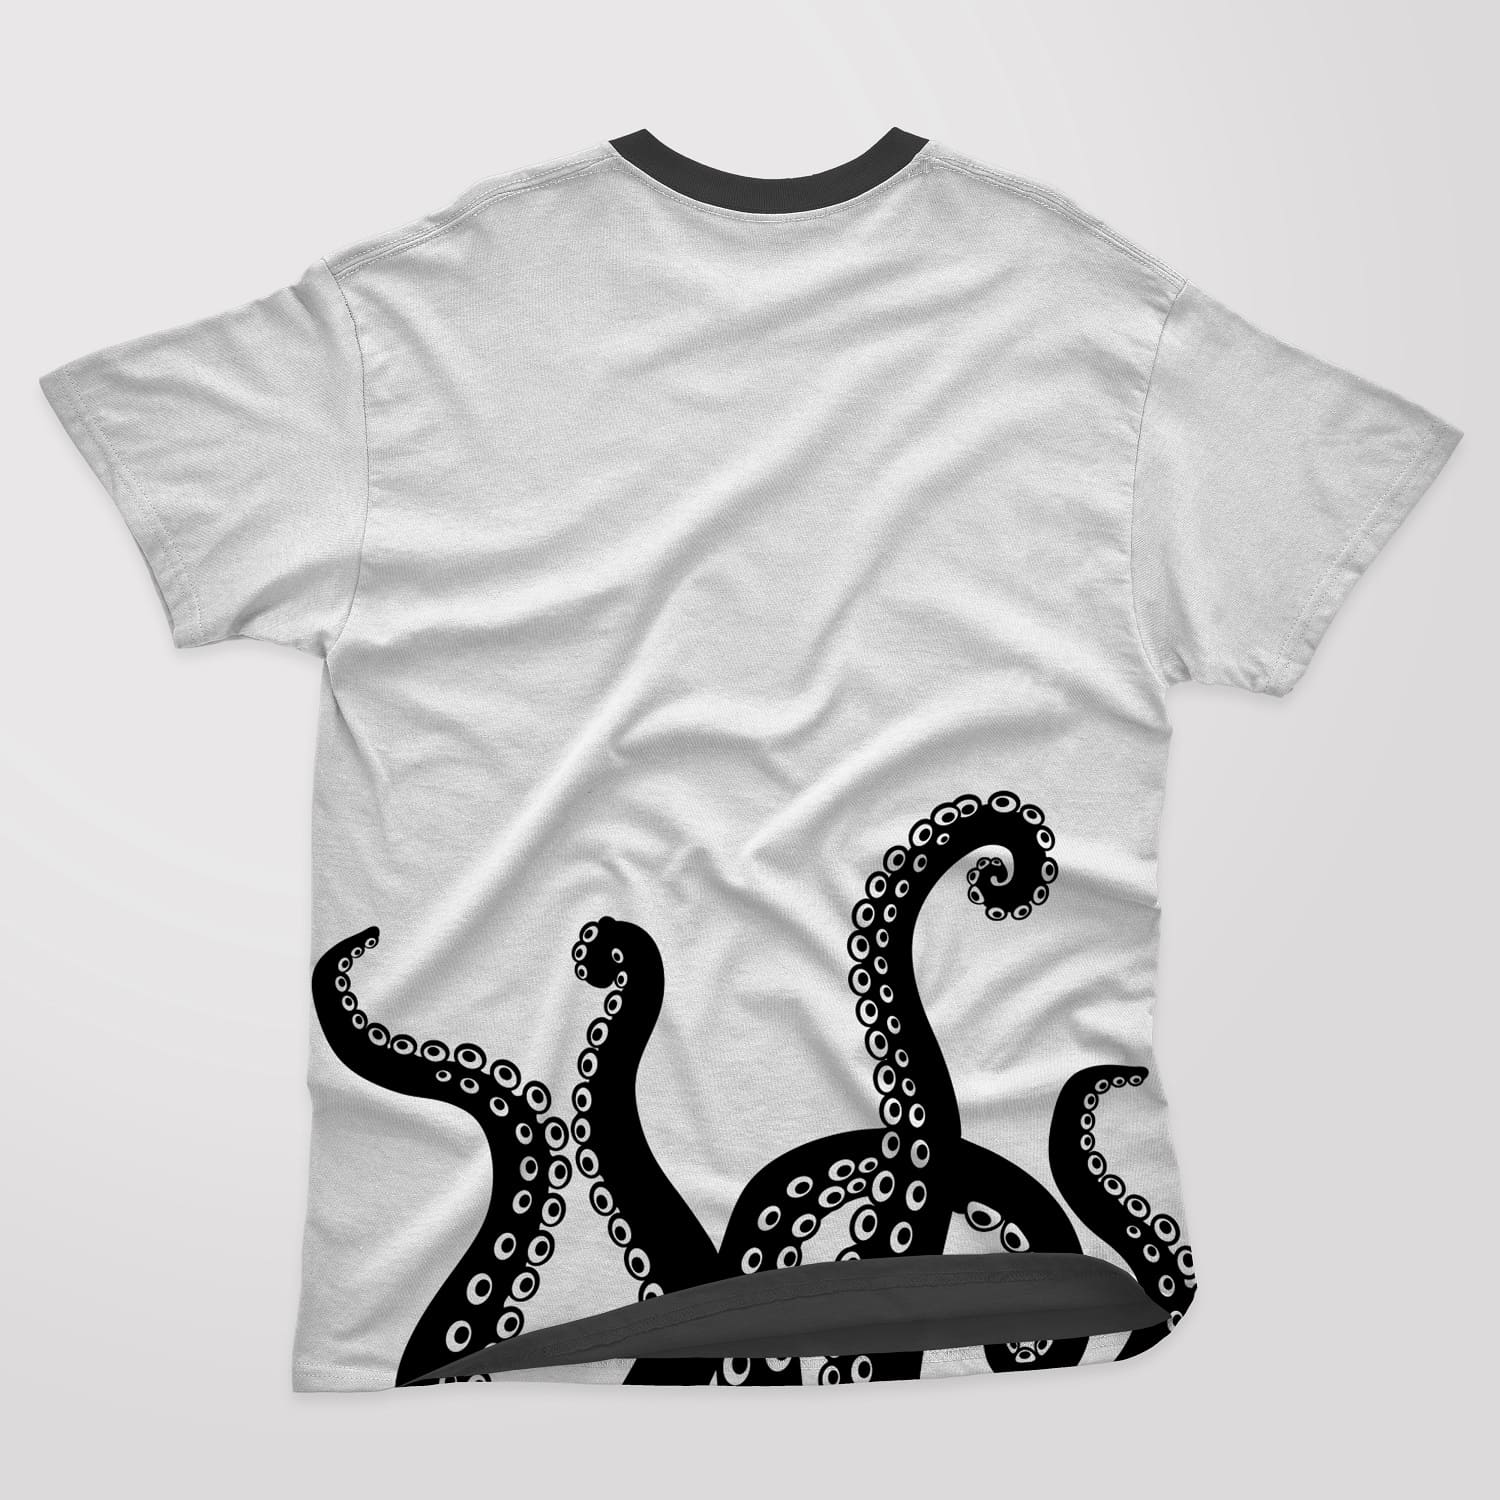 Five black octopus tentacles pointing upwards on a white t-shirt.